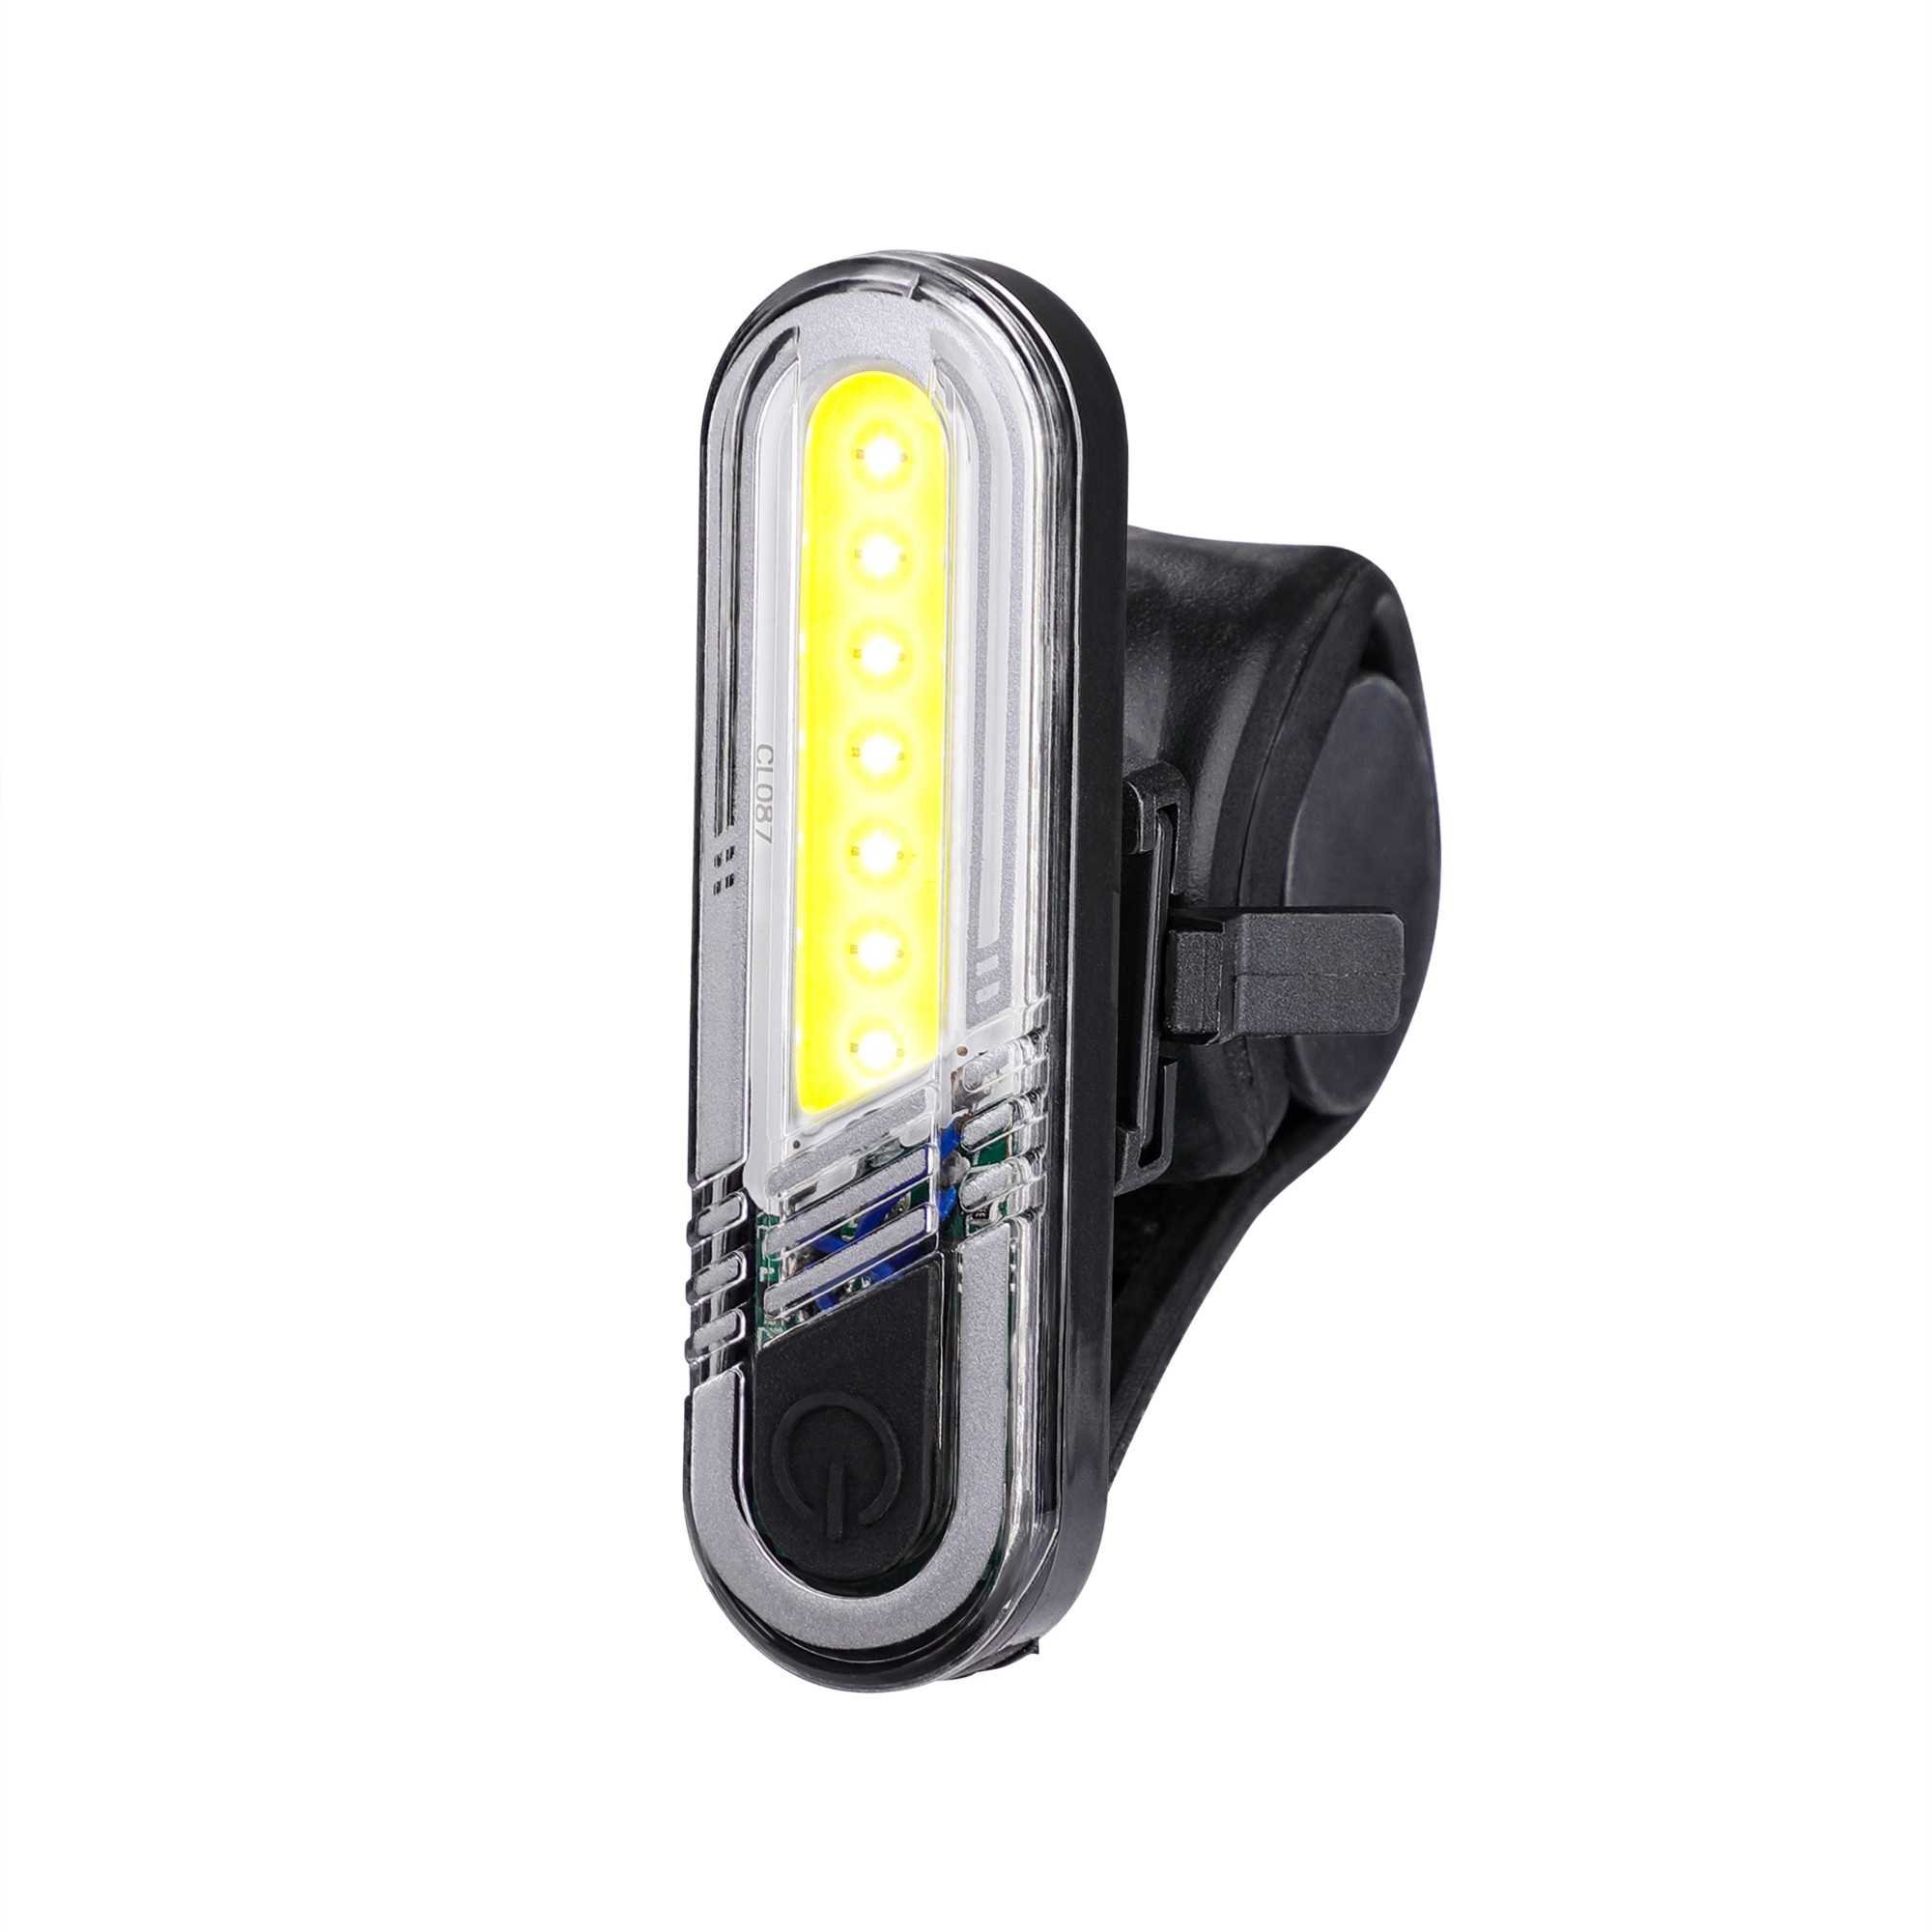 USB Rechargeable bike tail light BC-TL5442